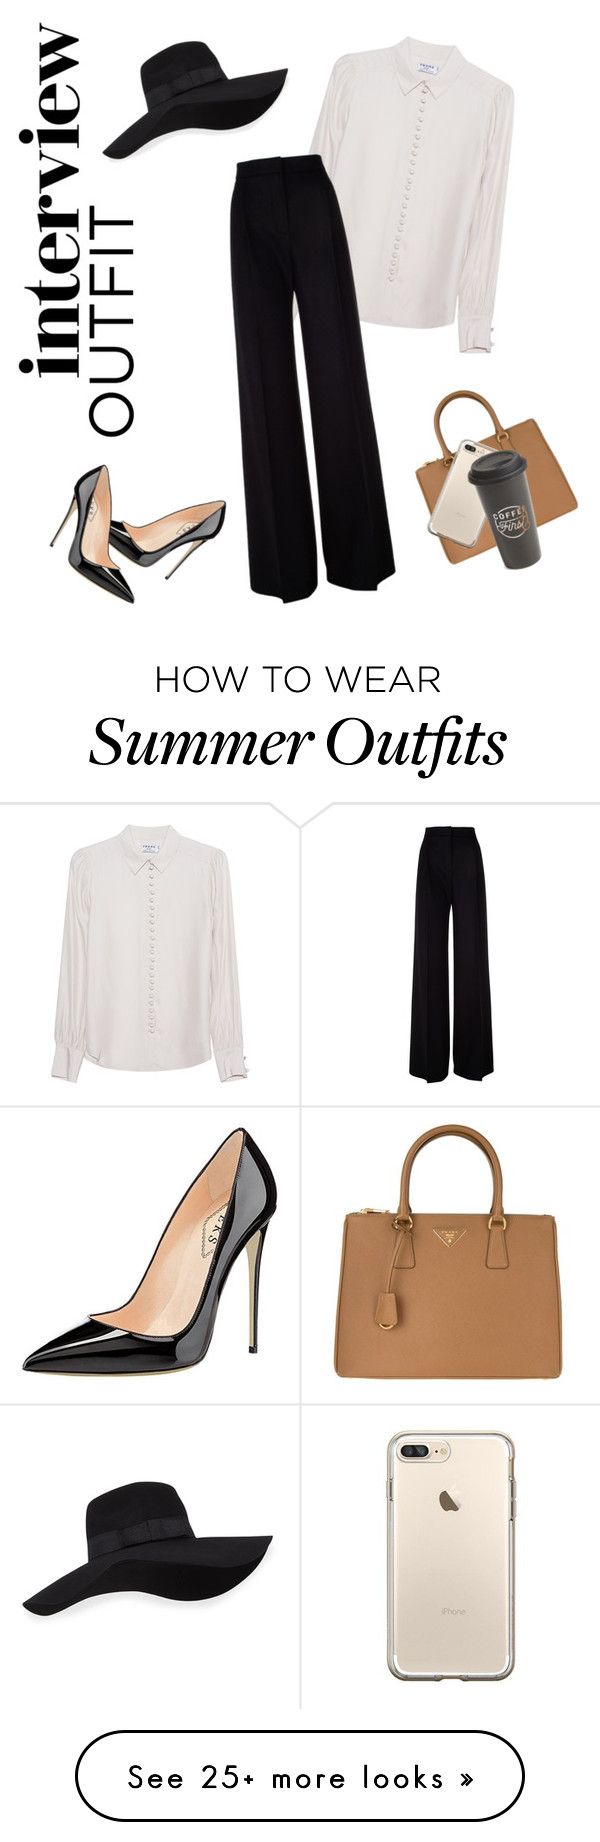 "60-second interview outfit" by cecewillliams on Polyvore featuring Fr...